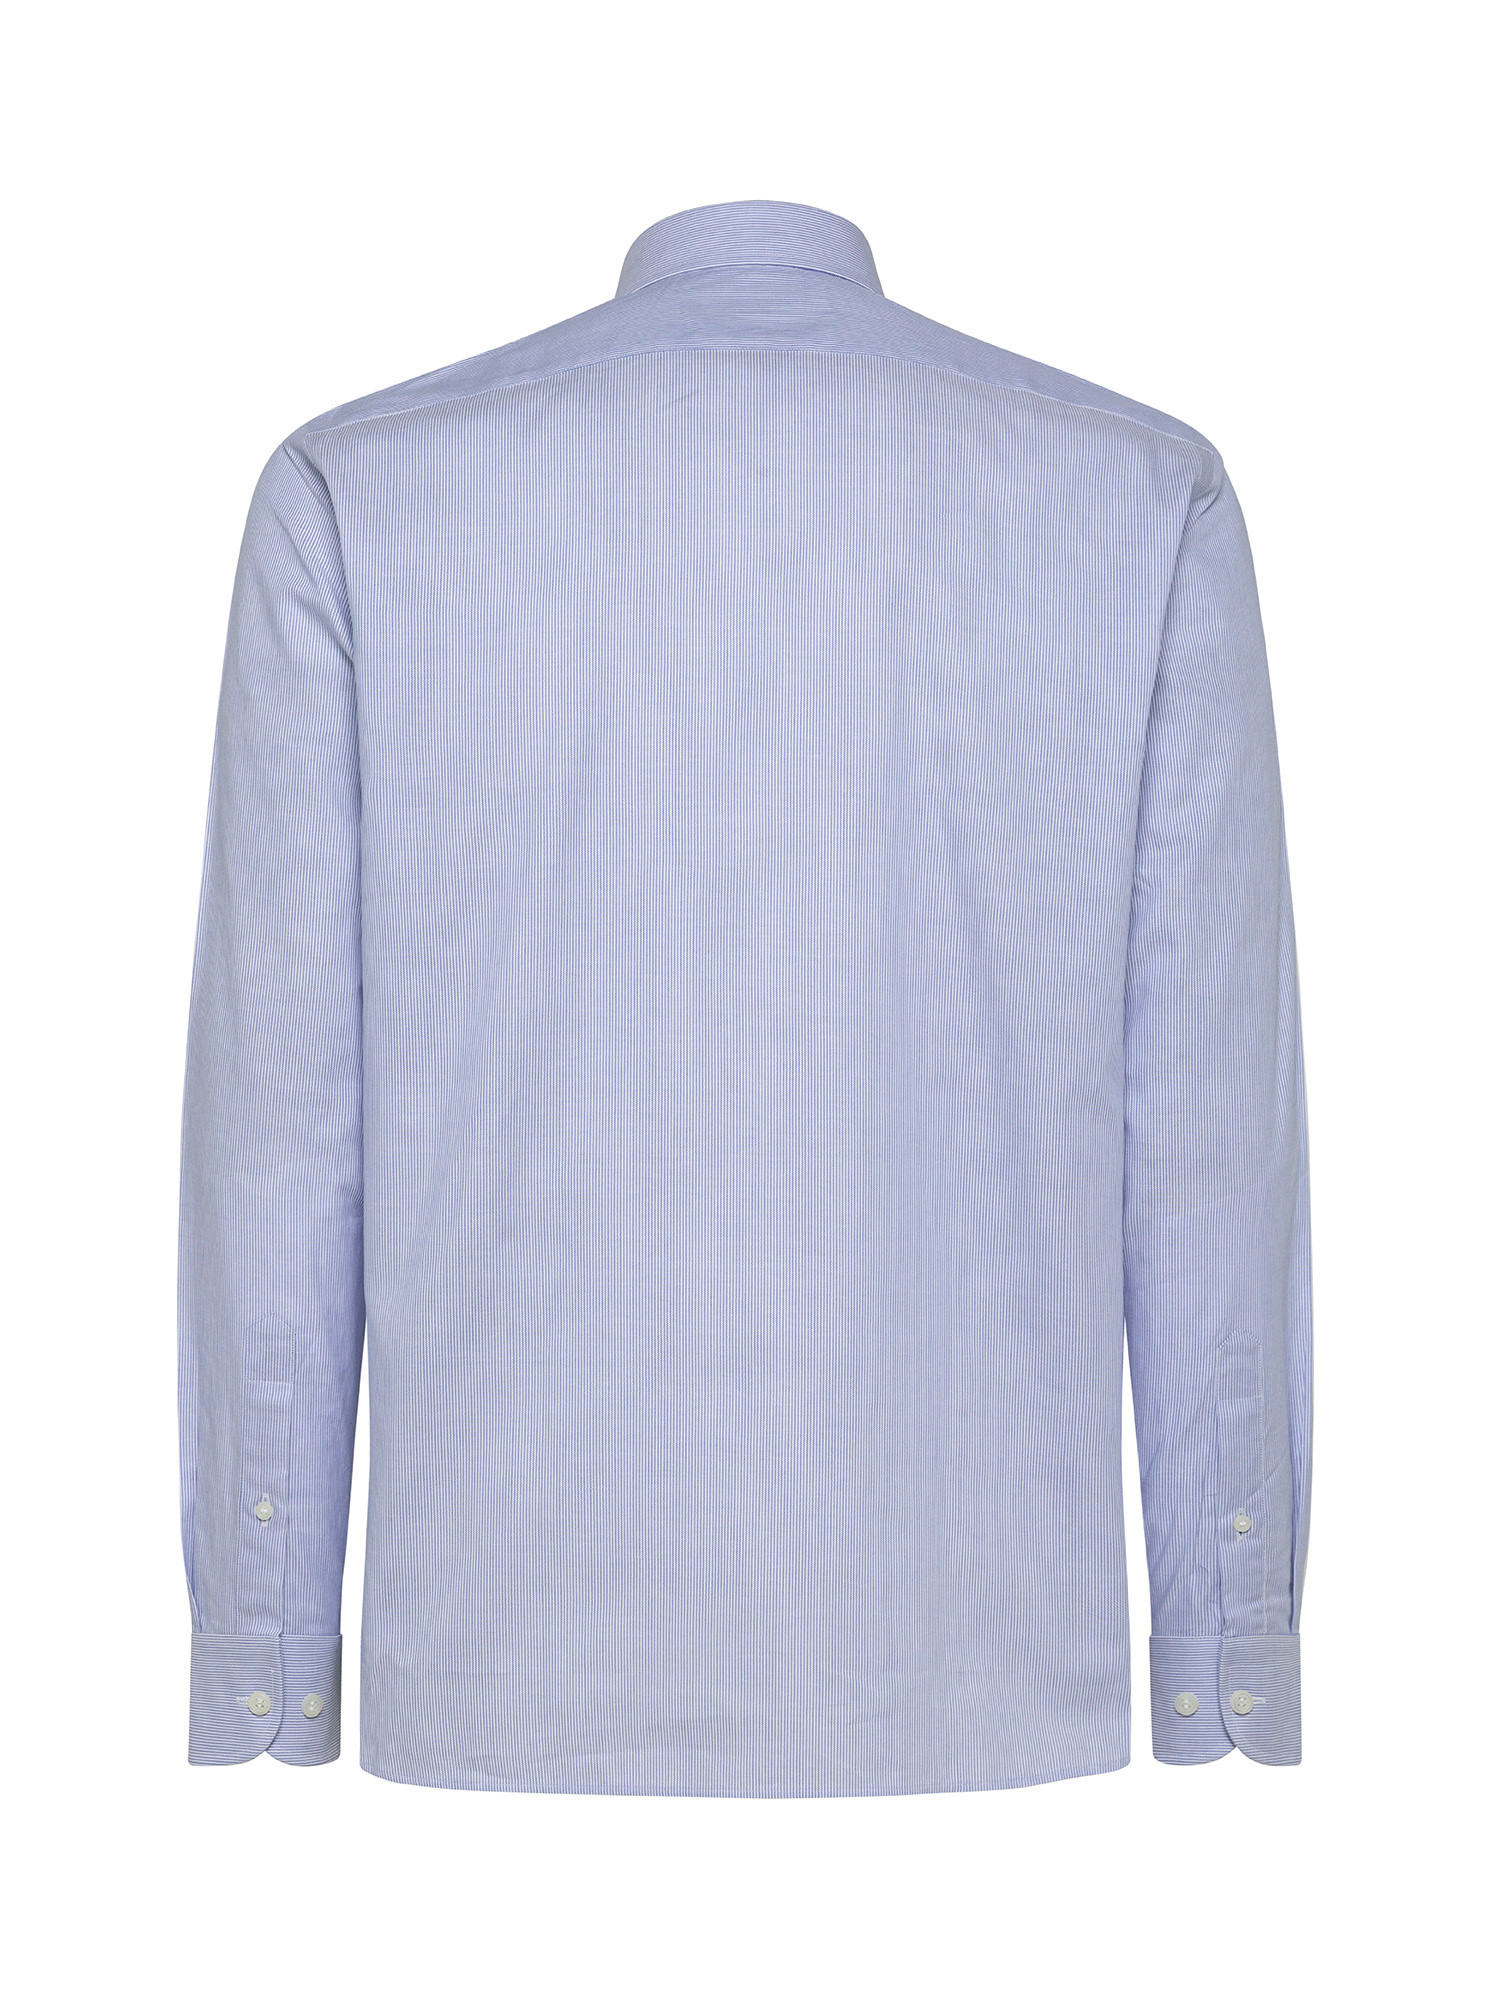 Basic tailor fit shirt in pure cotton, Light Blue, large image number 2